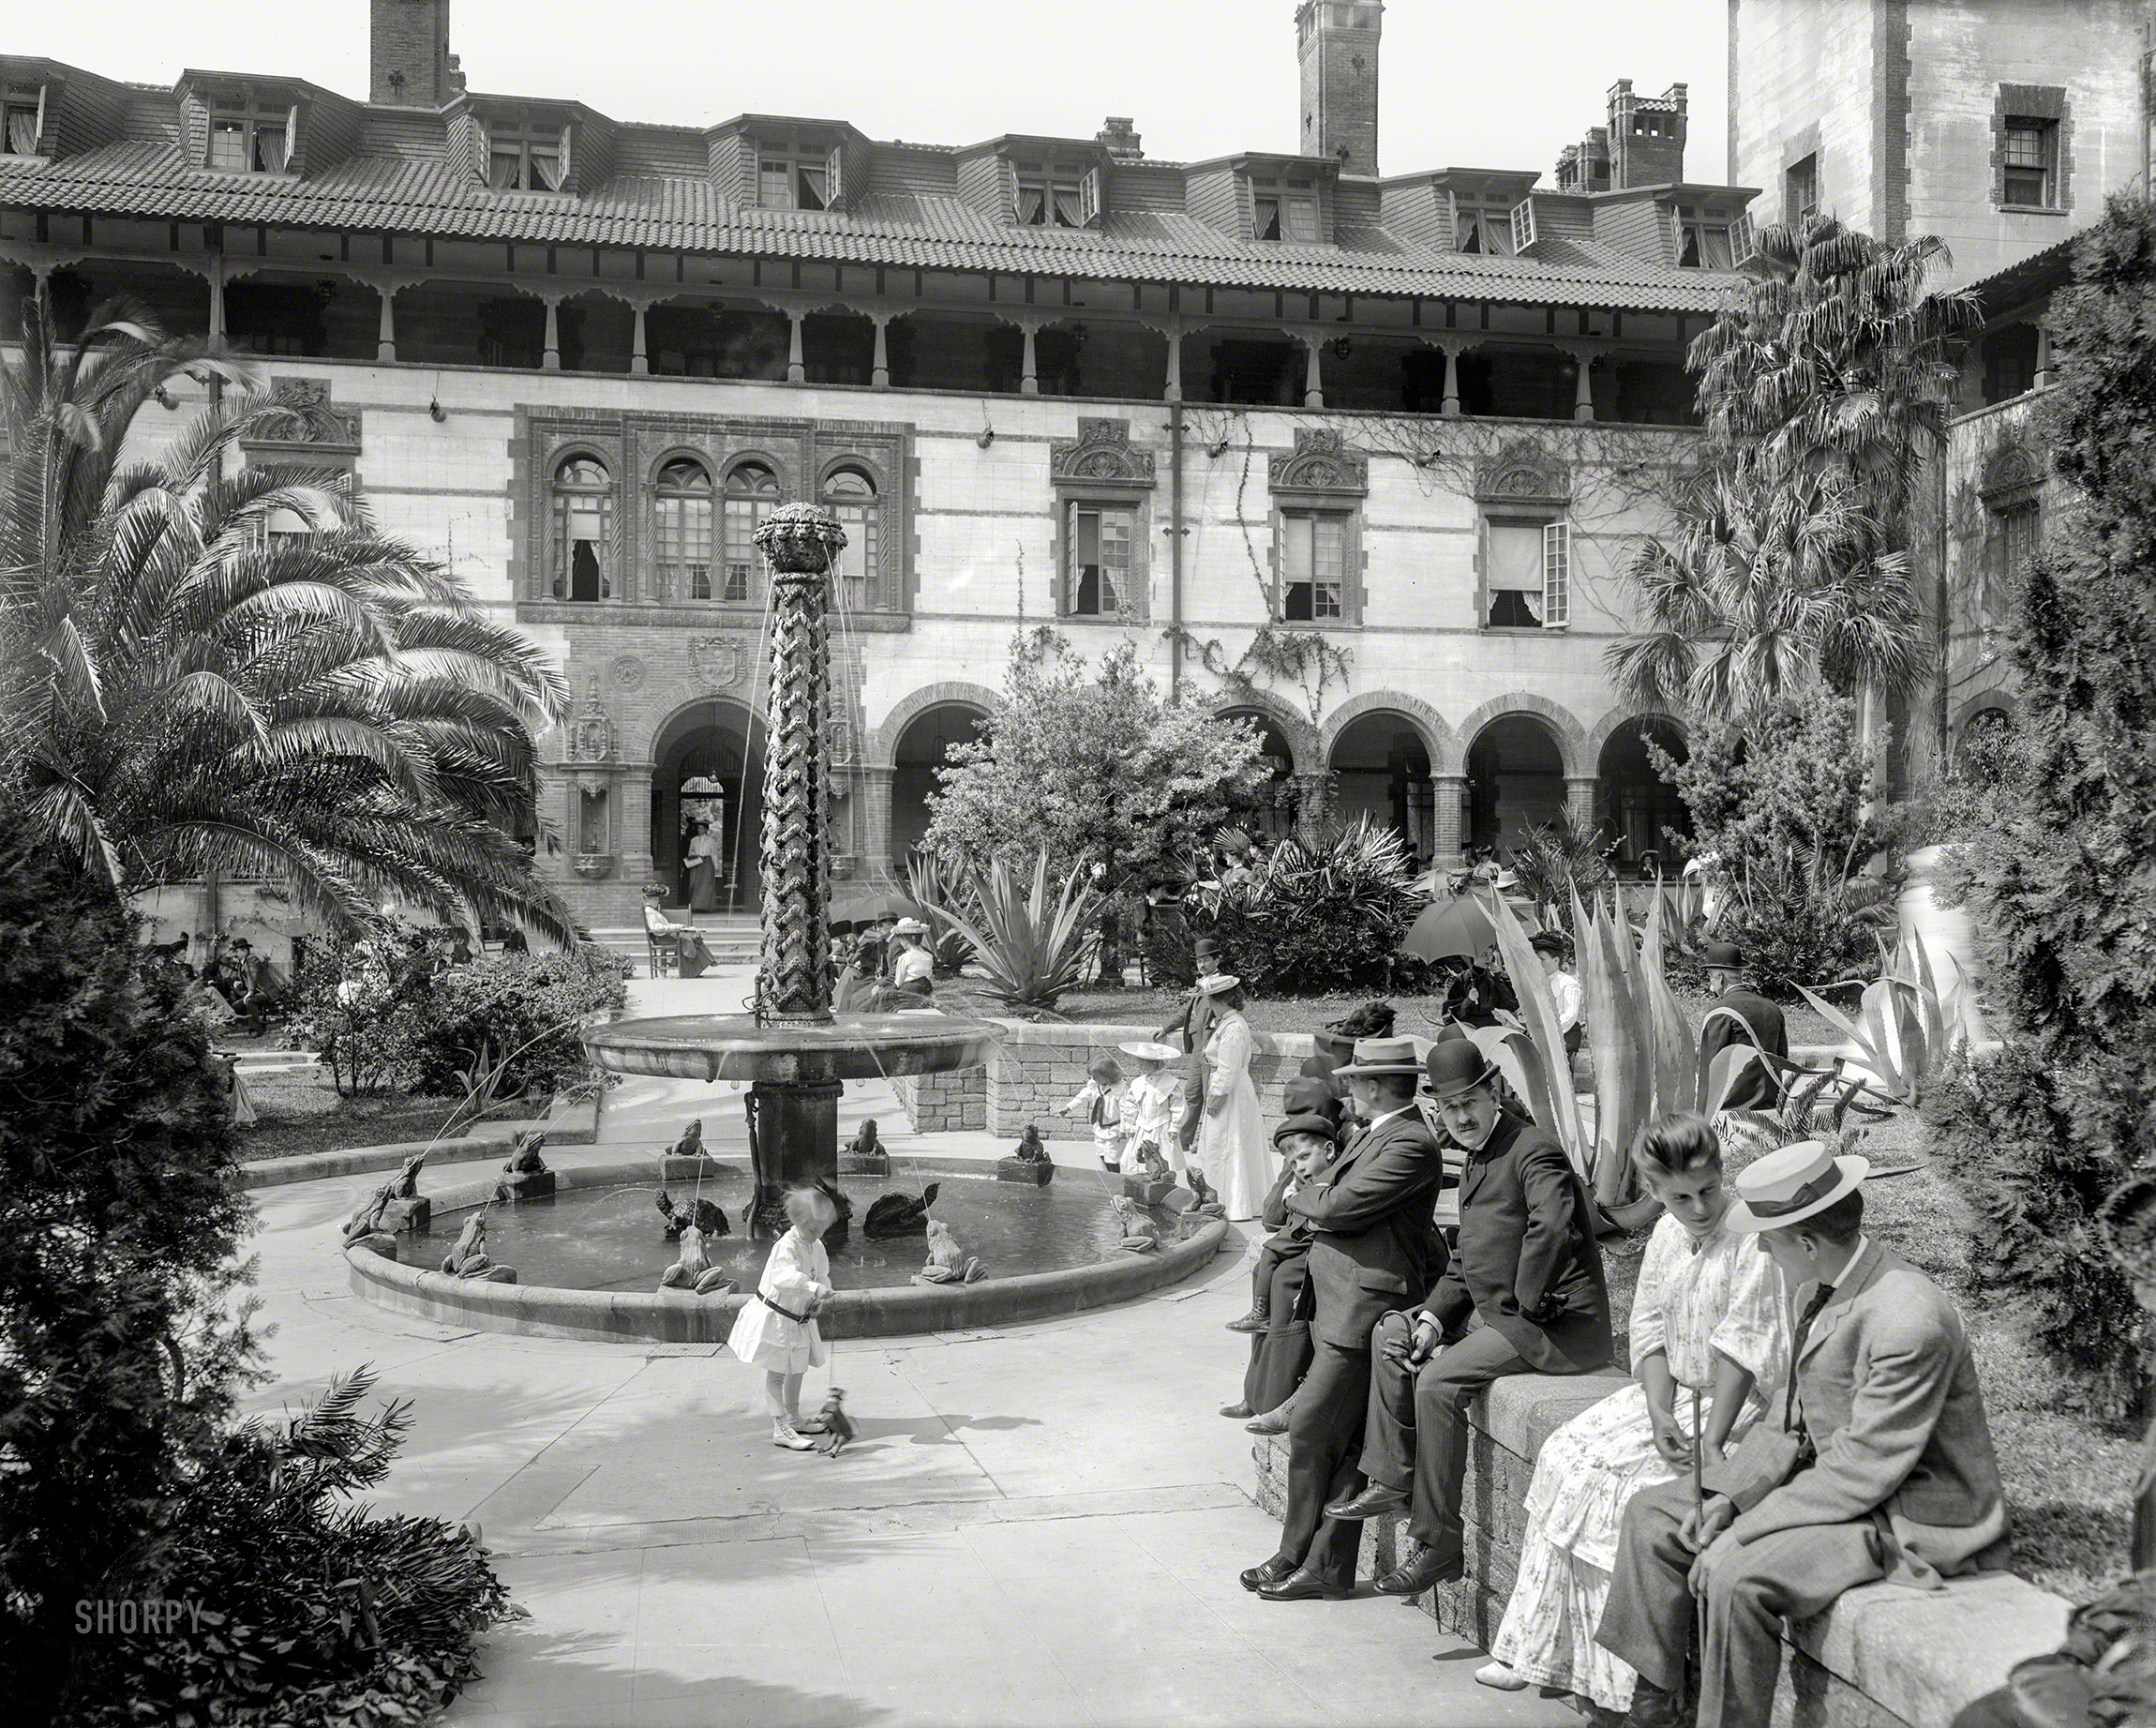 St. Augustine, Florida, circa 1905. "In the court of the Hotel Ponce de Leon." Back at the Frog Fountain. 8x10 inch glass negative, Detroit Photographic Company. View full size.